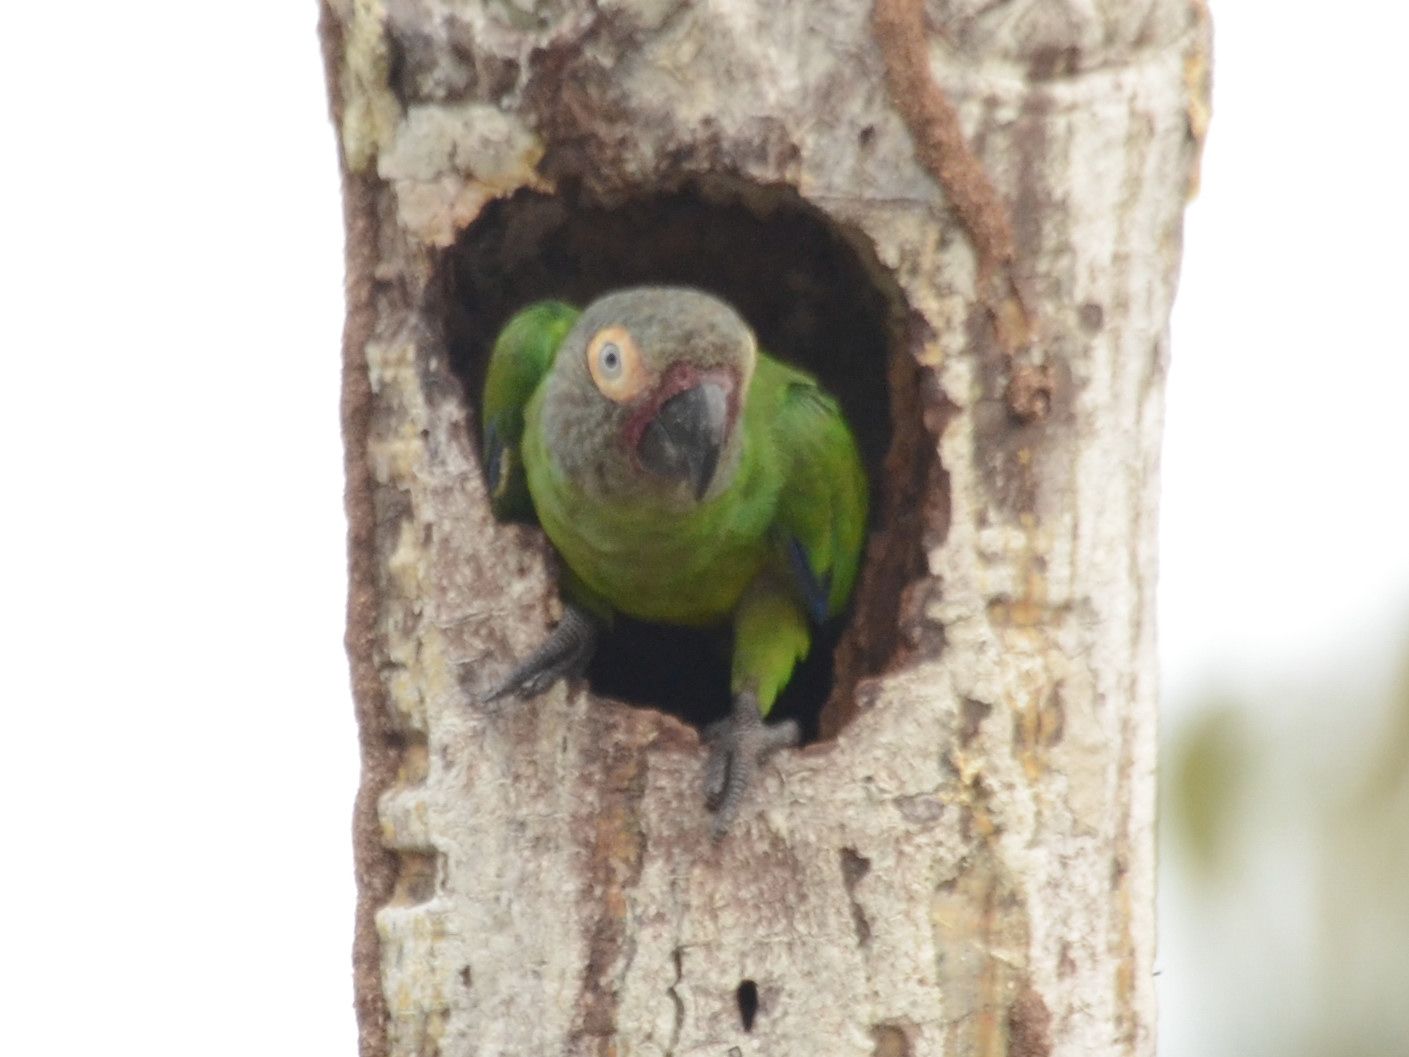 Click picture to see more Dusky-headed Parakeets.